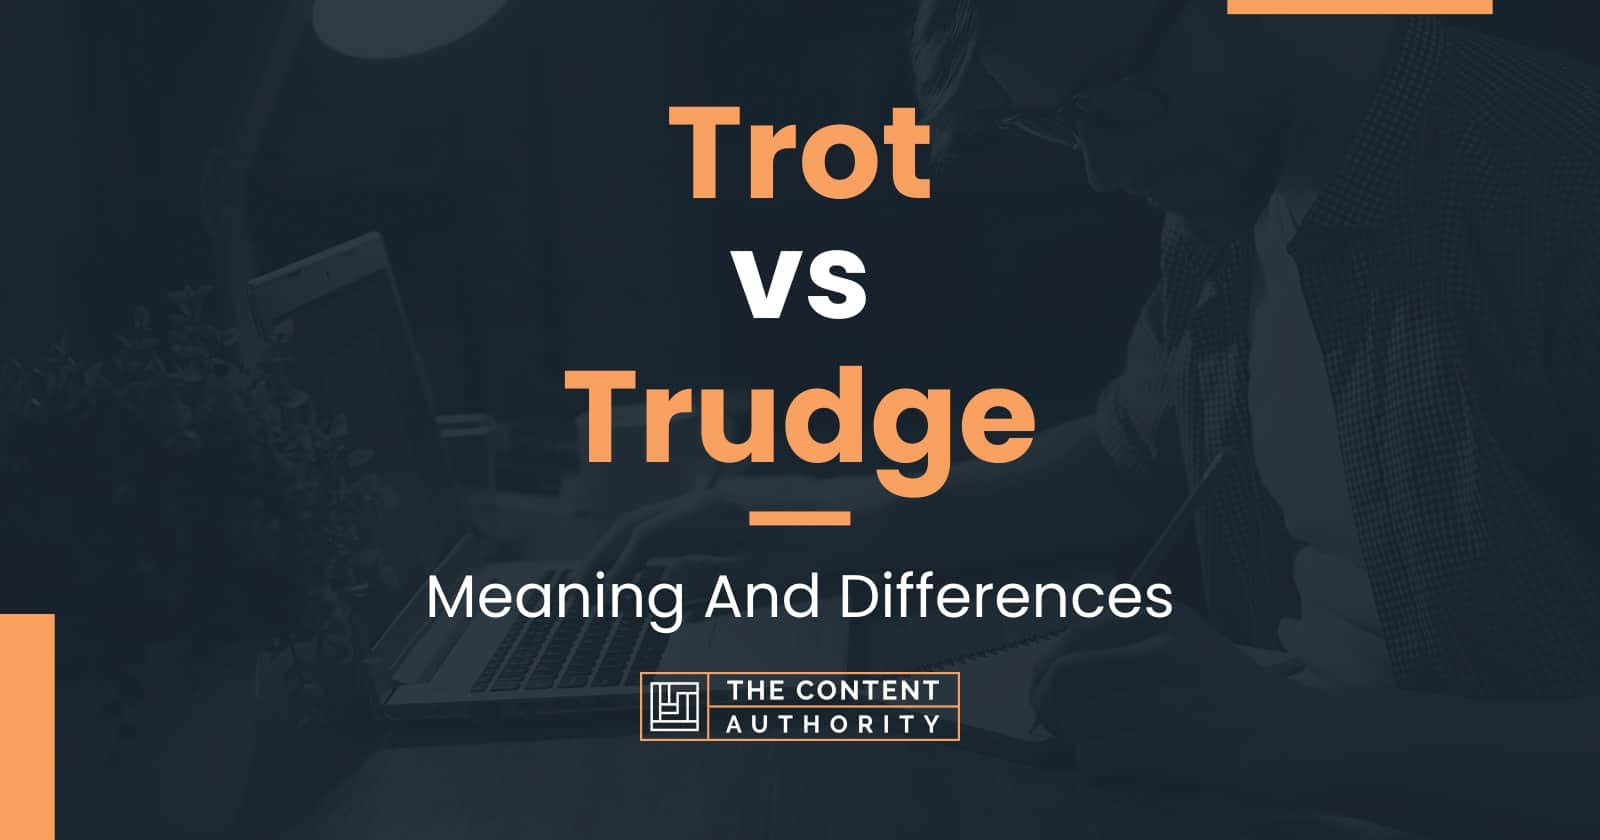 Trot vs Trudge: Meaning And Differences